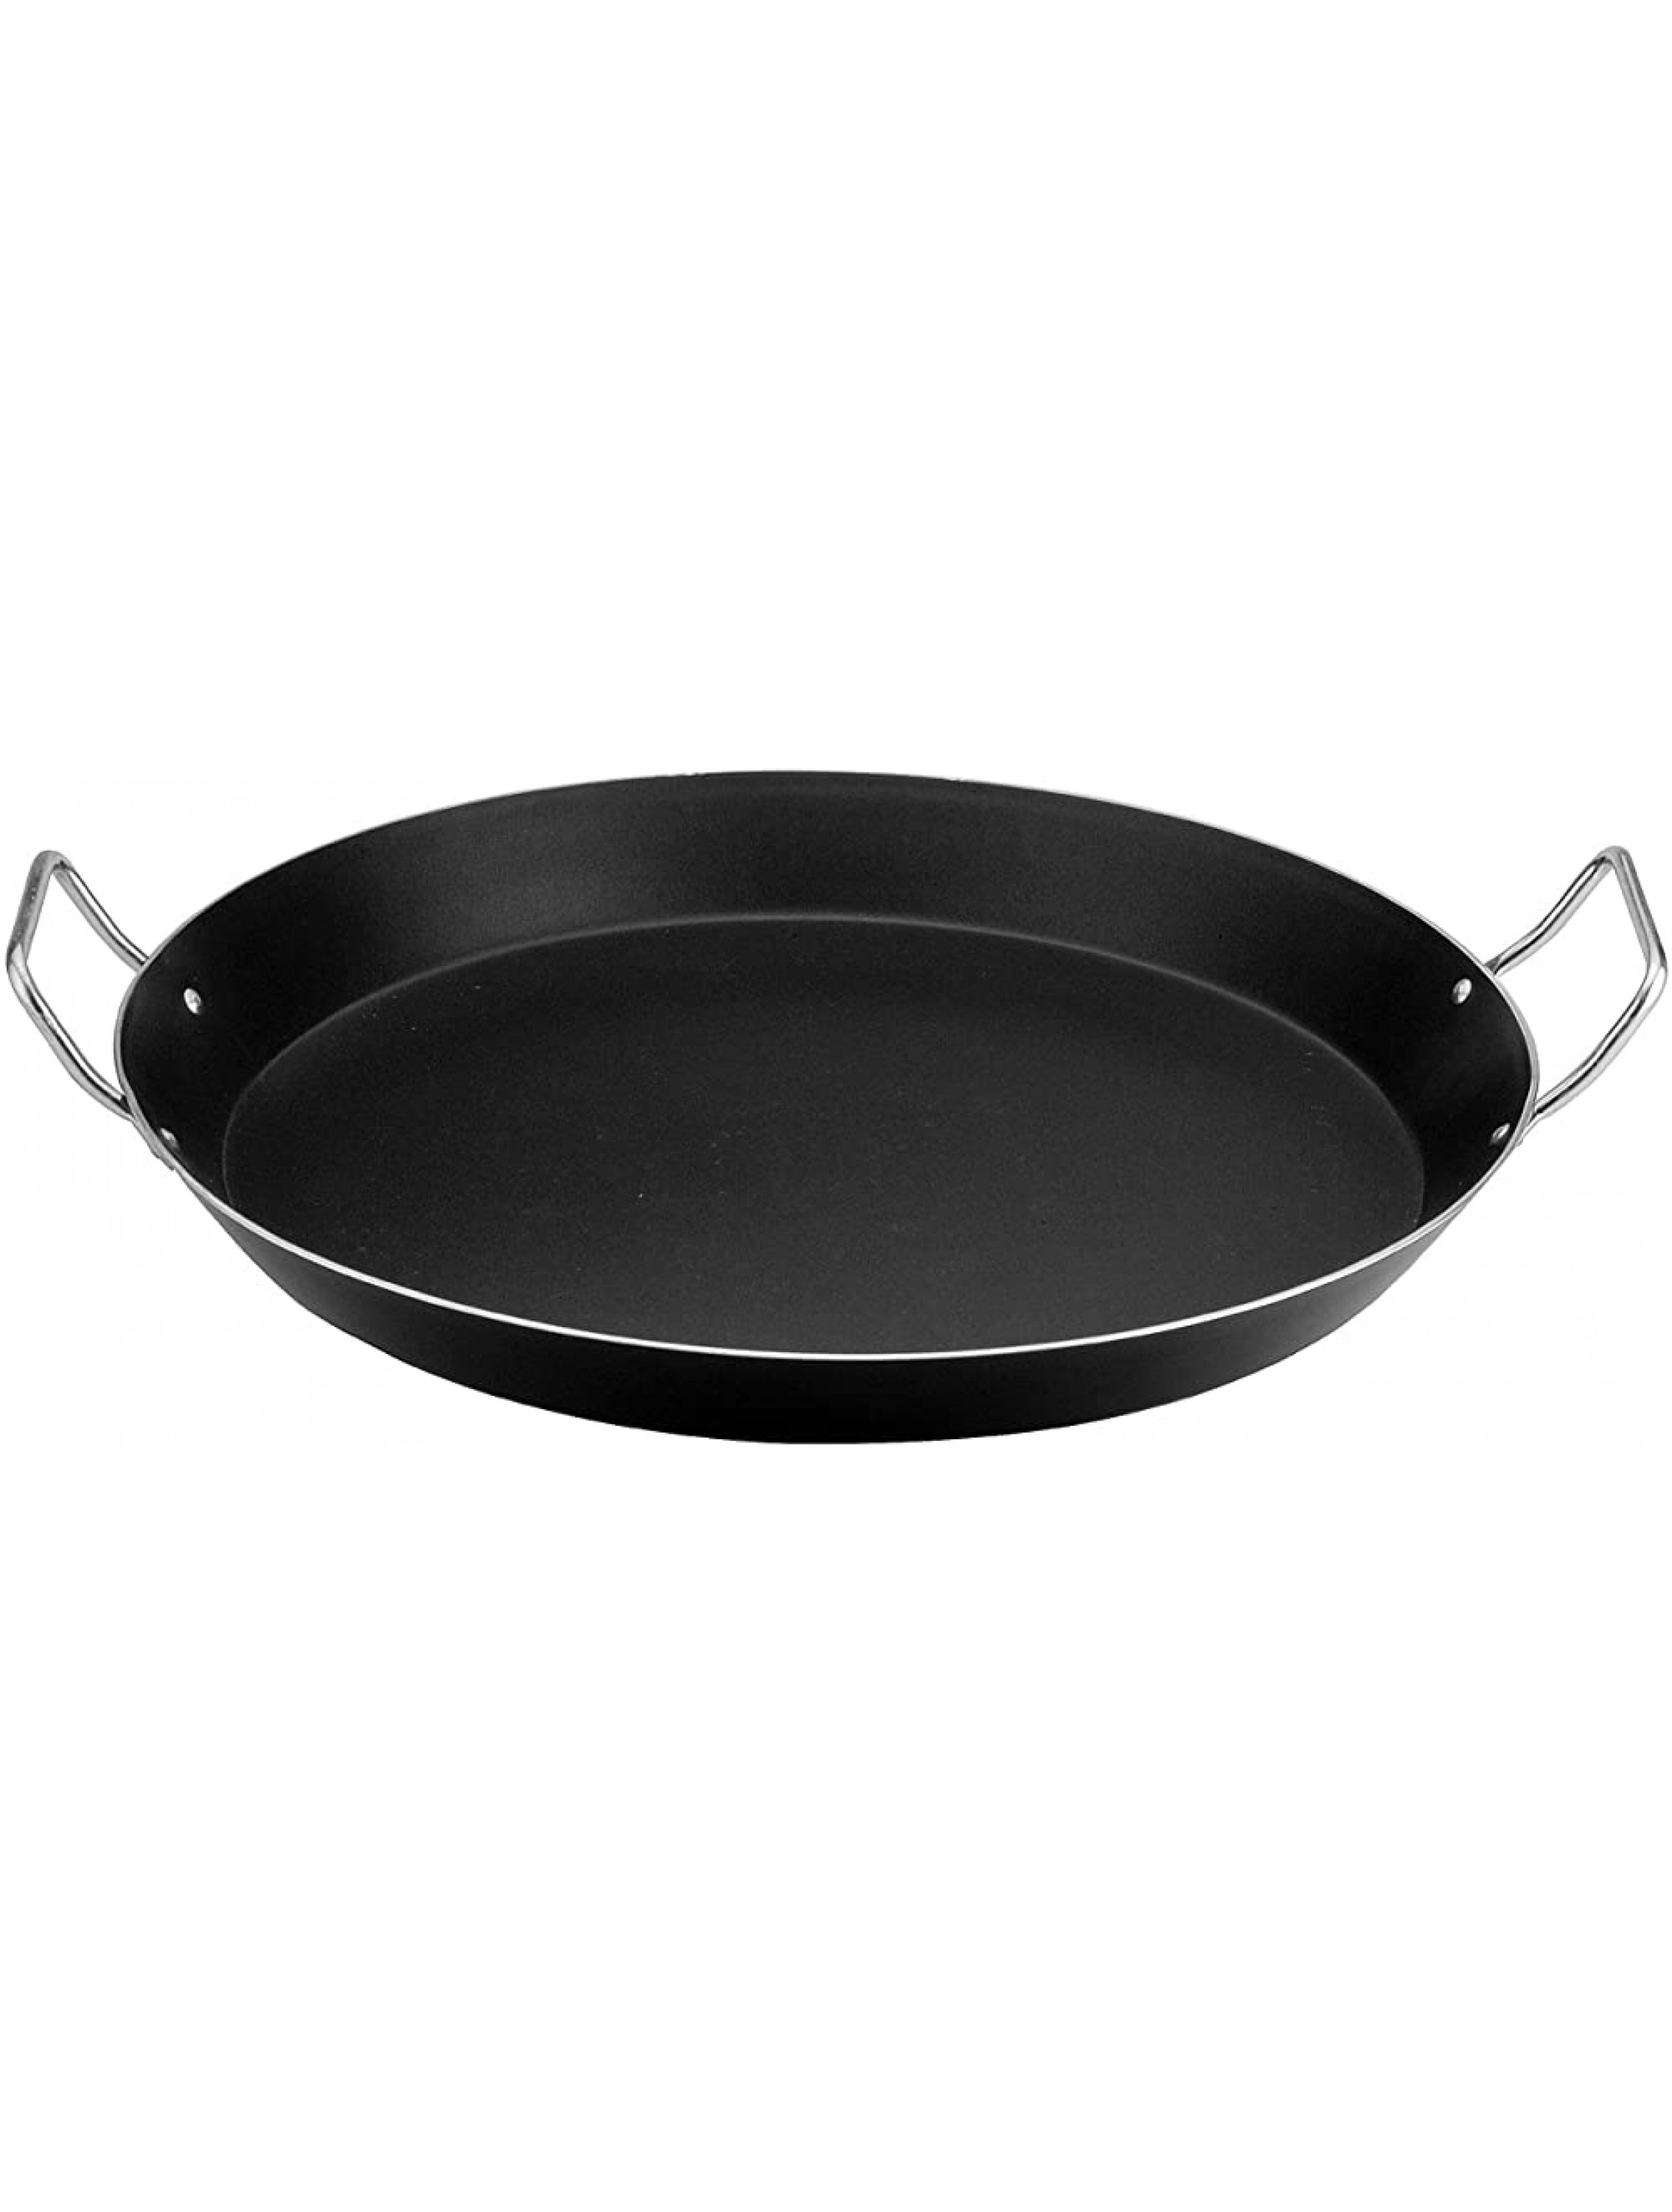 Caroni Easy Cooking Paellera Pan with 2-Handles 15.87-Inch - BPHTFXGSY